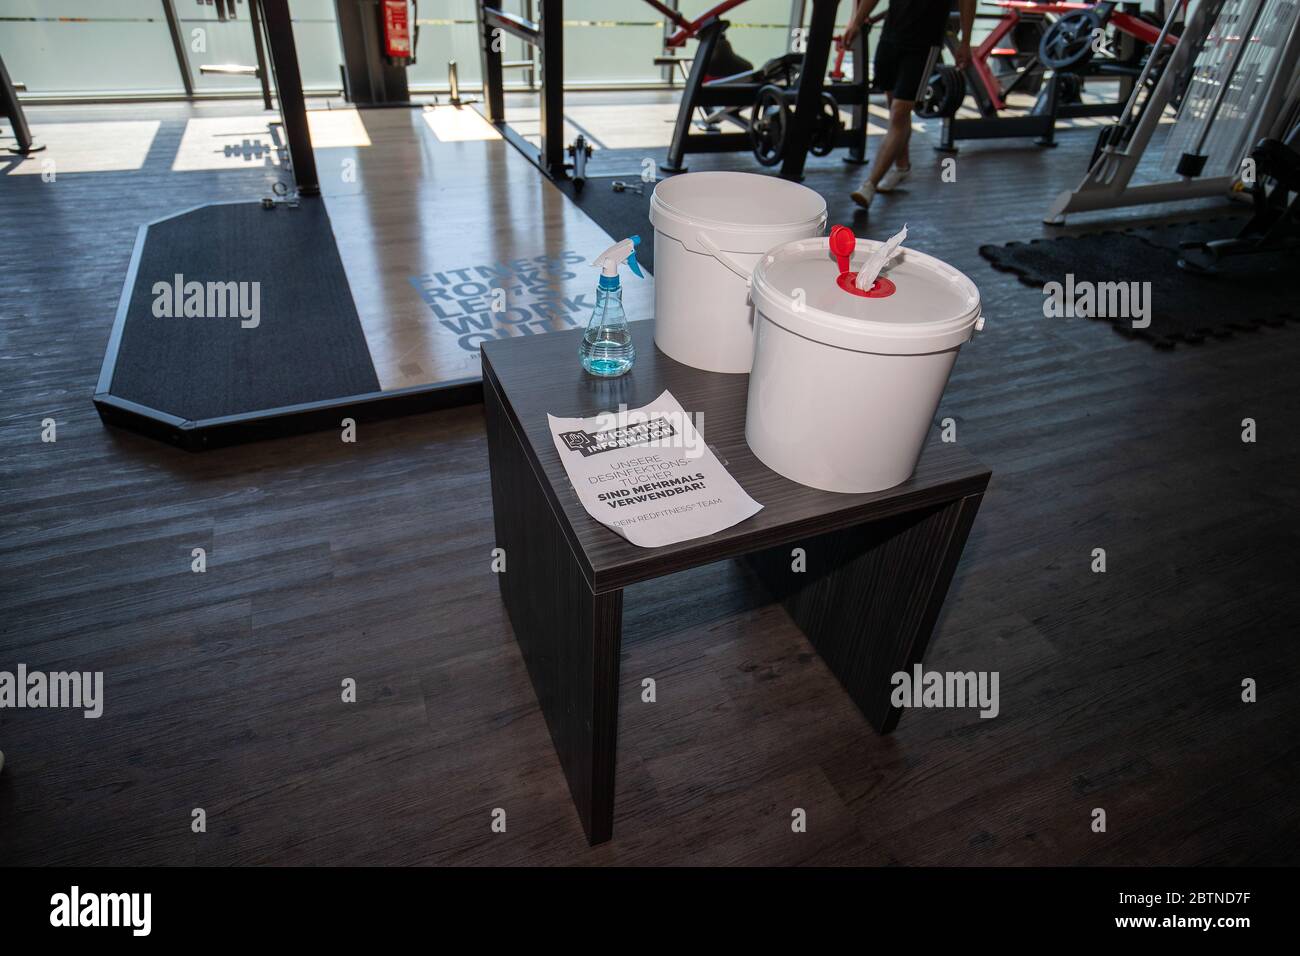 Frankfurt, Germany. 27th May, 2020. Disinfection paper towels are prepared  for people at a gym in Schwerte, Germany, May 27, 2020. The German federal  government and the 16 states have agreed in